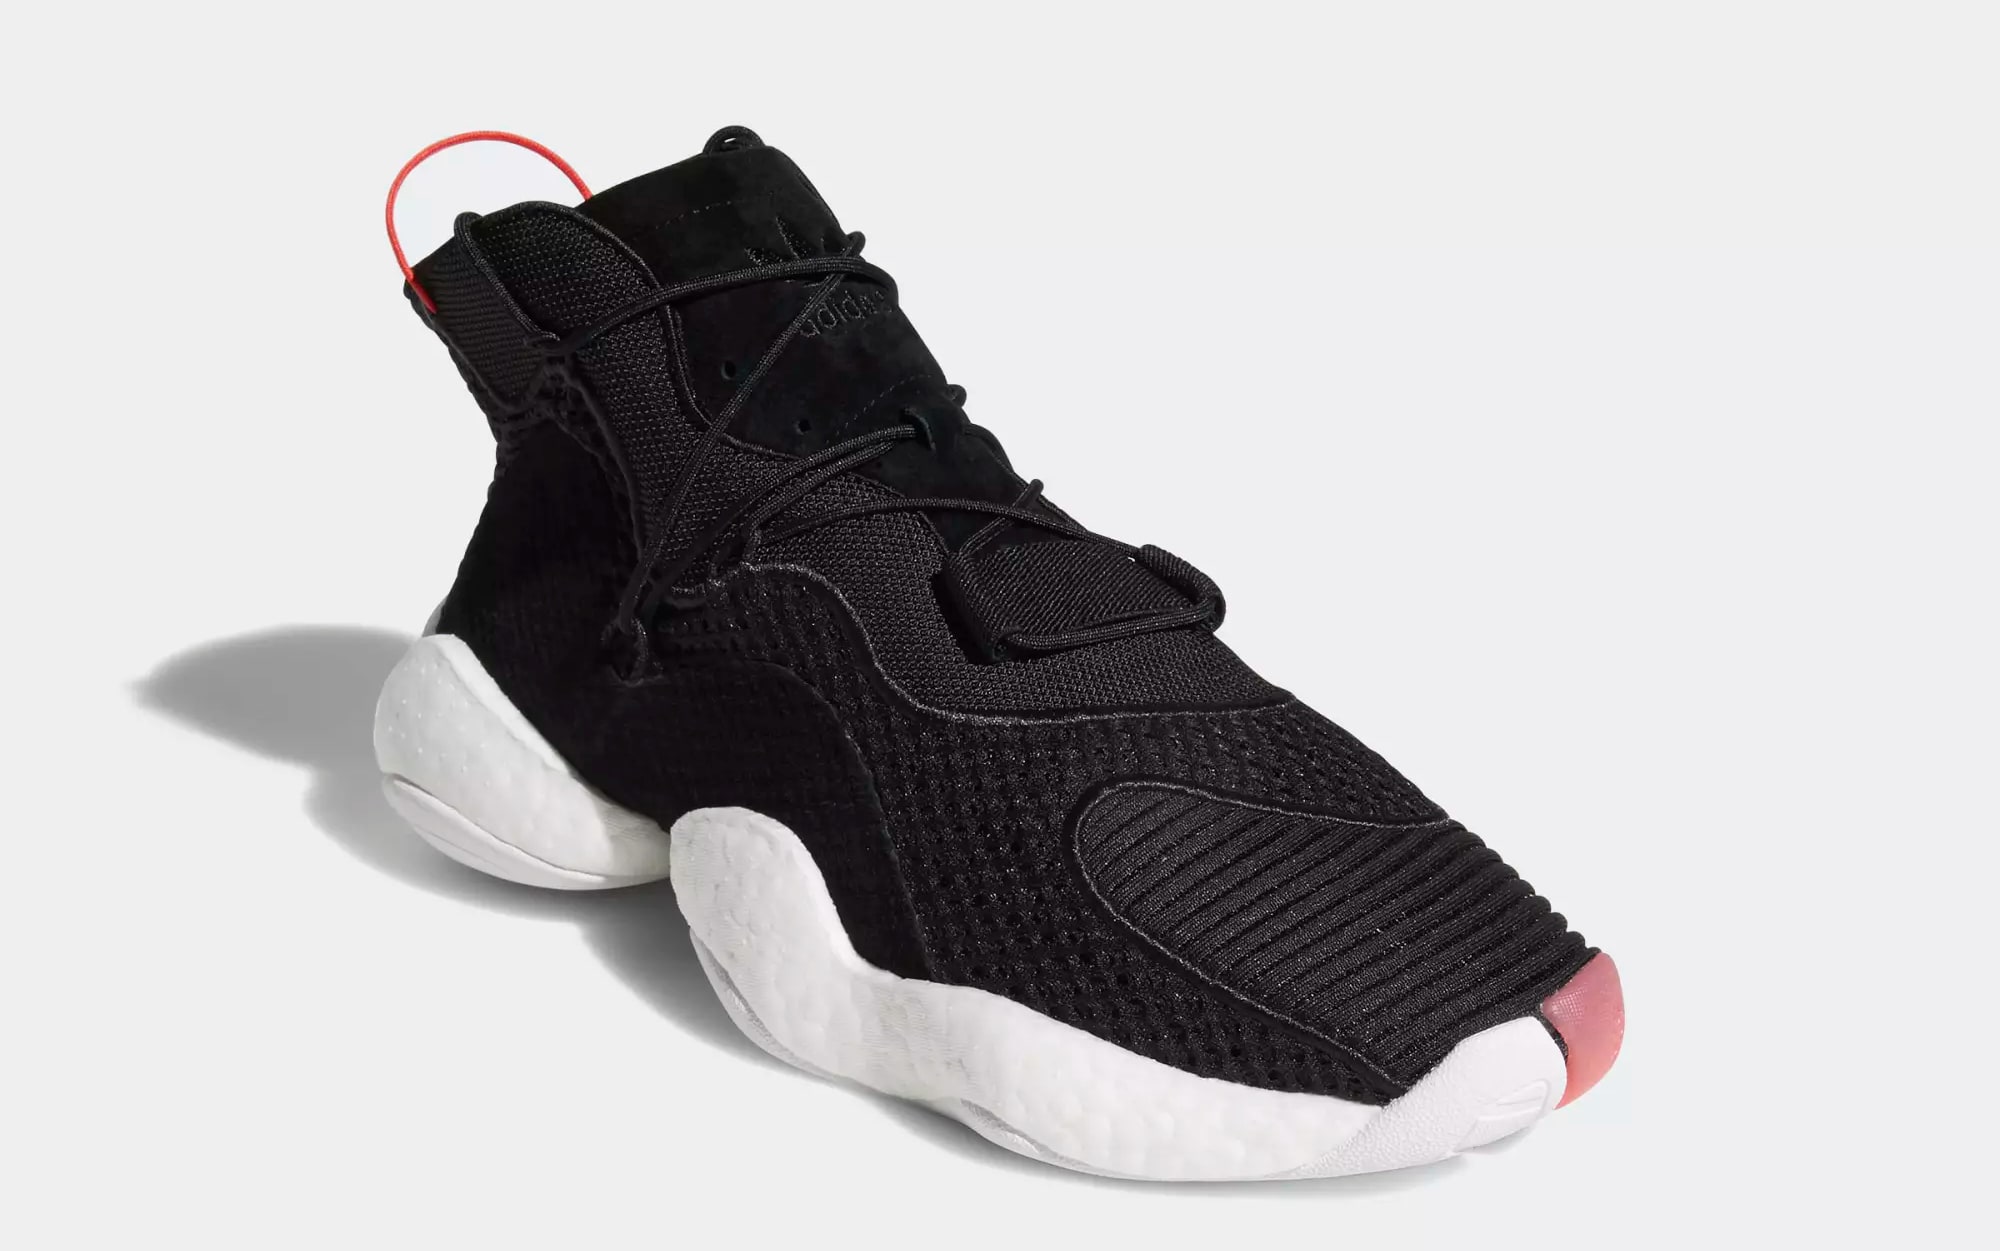 Adidas Crazy BYW &#x27;Core Black/Cloud White/Bright Red&#x27; B37480 (Front)